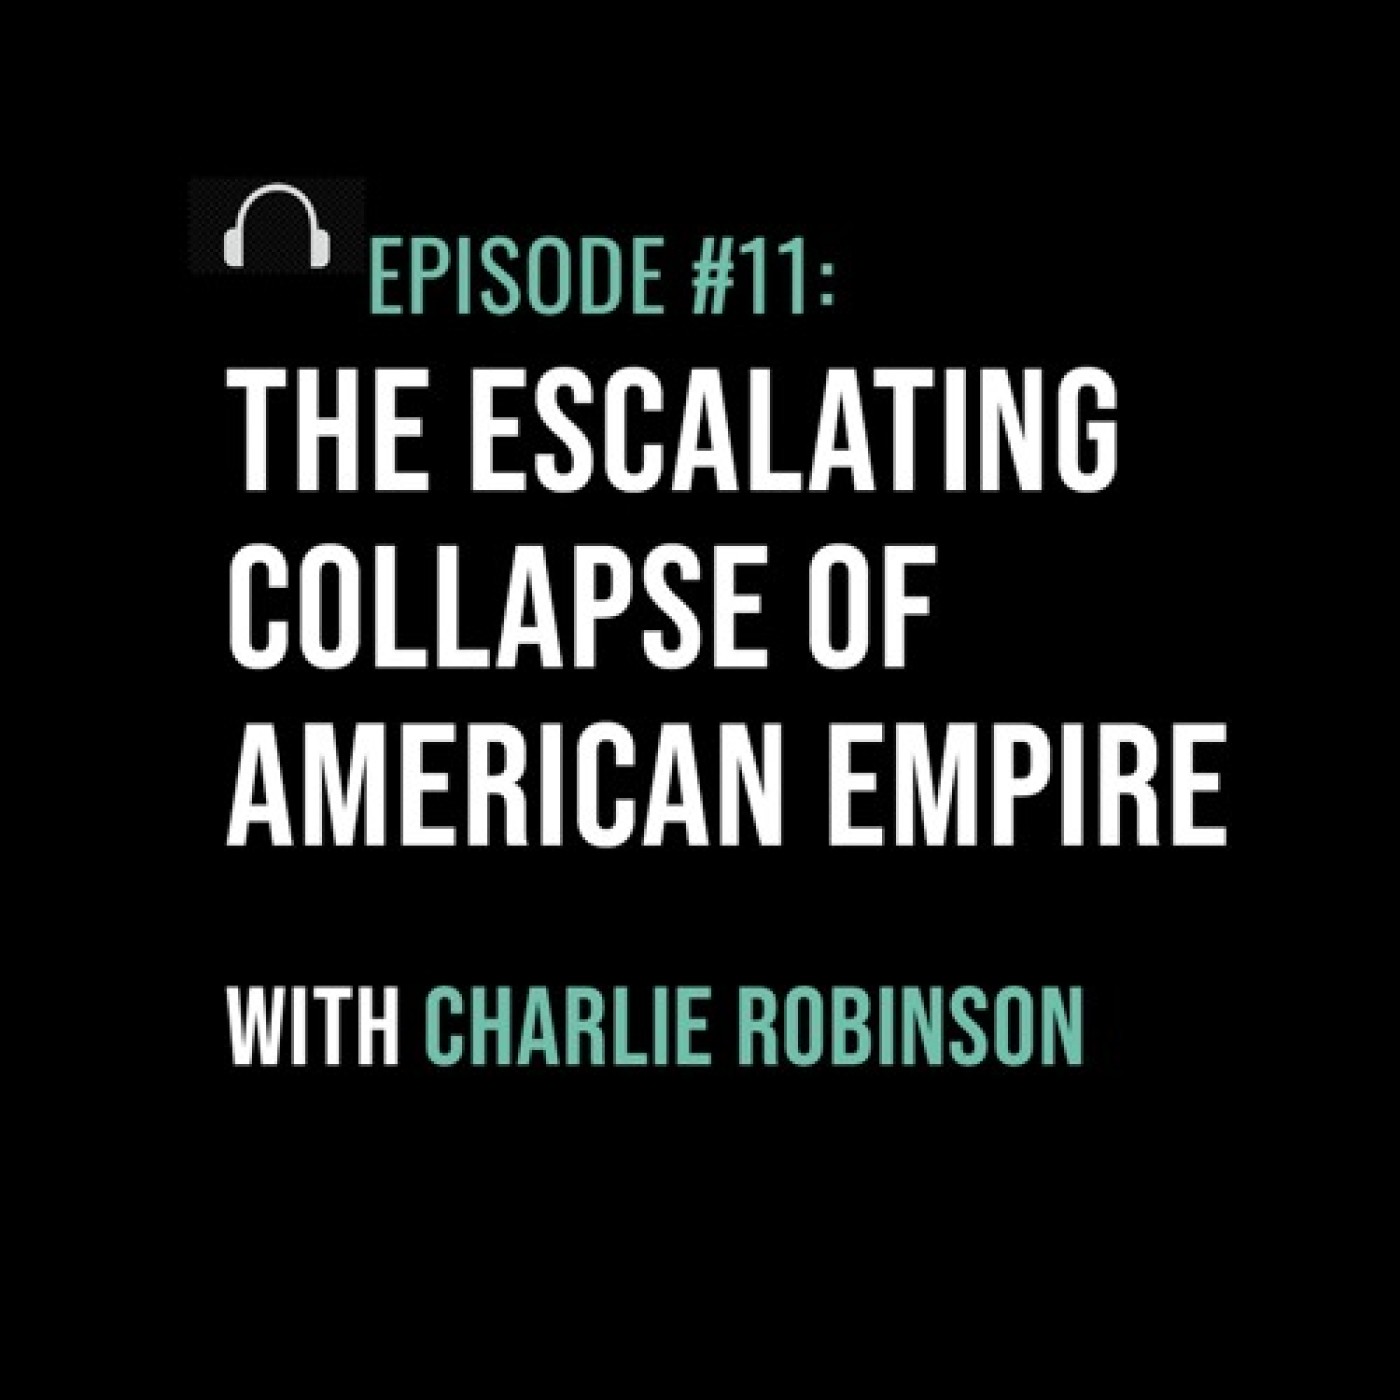 The Escalating Collapse of American Empire with Charlie Robinson